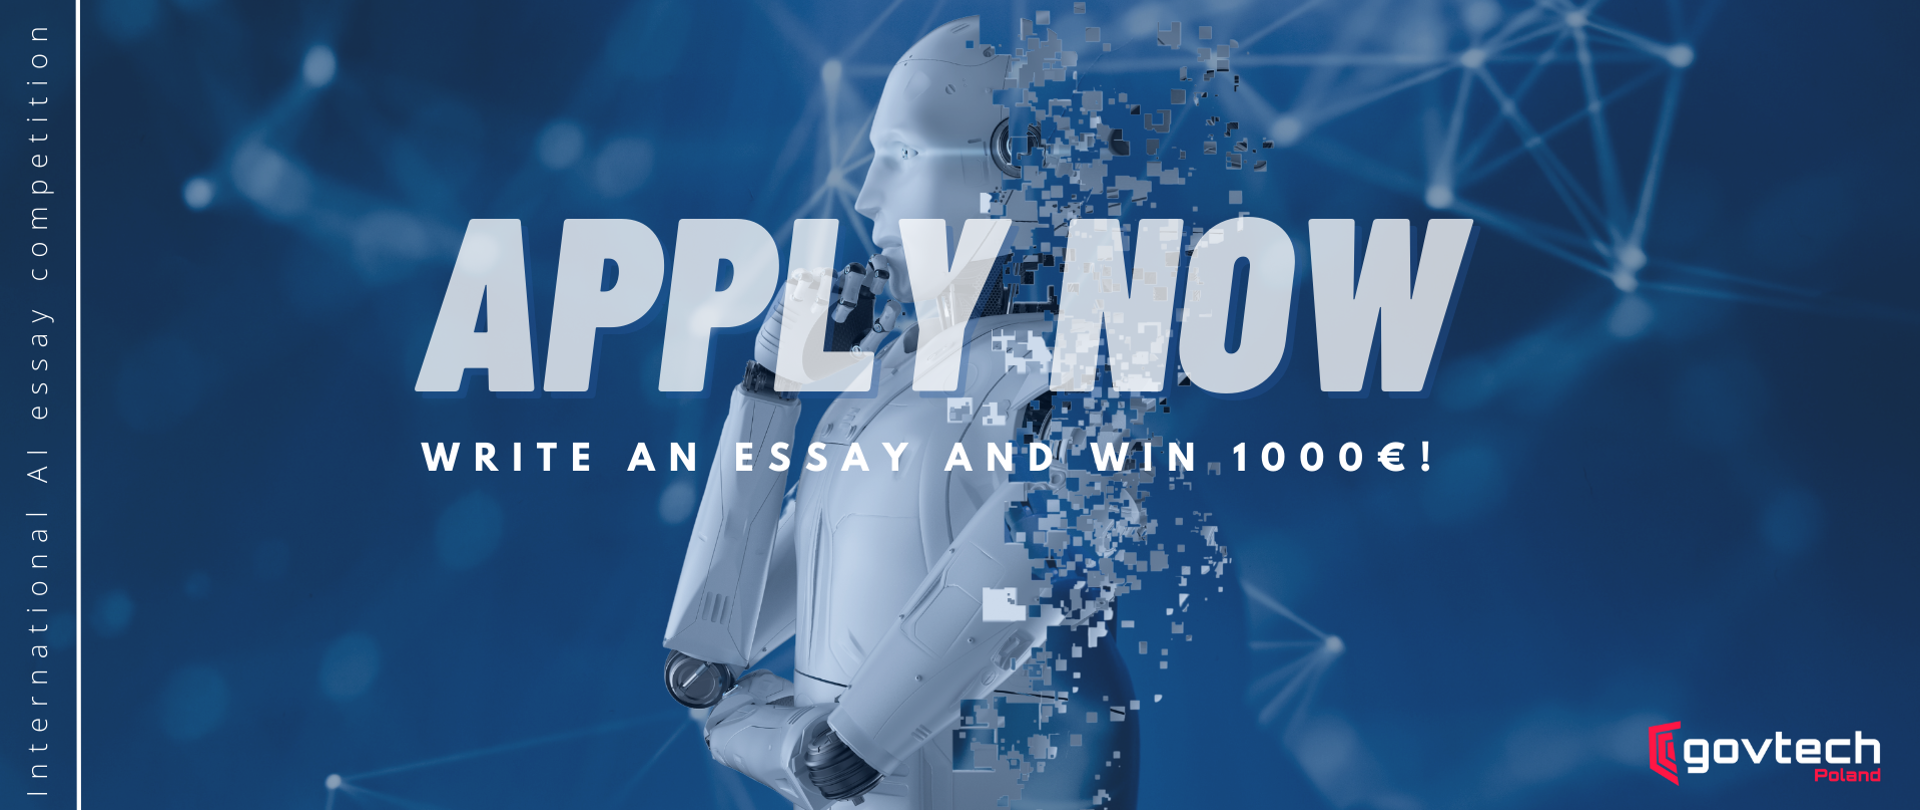 International AI Essay Competition - Apply Now. Write an essay and win 1000 euro!
Robot on a blue background